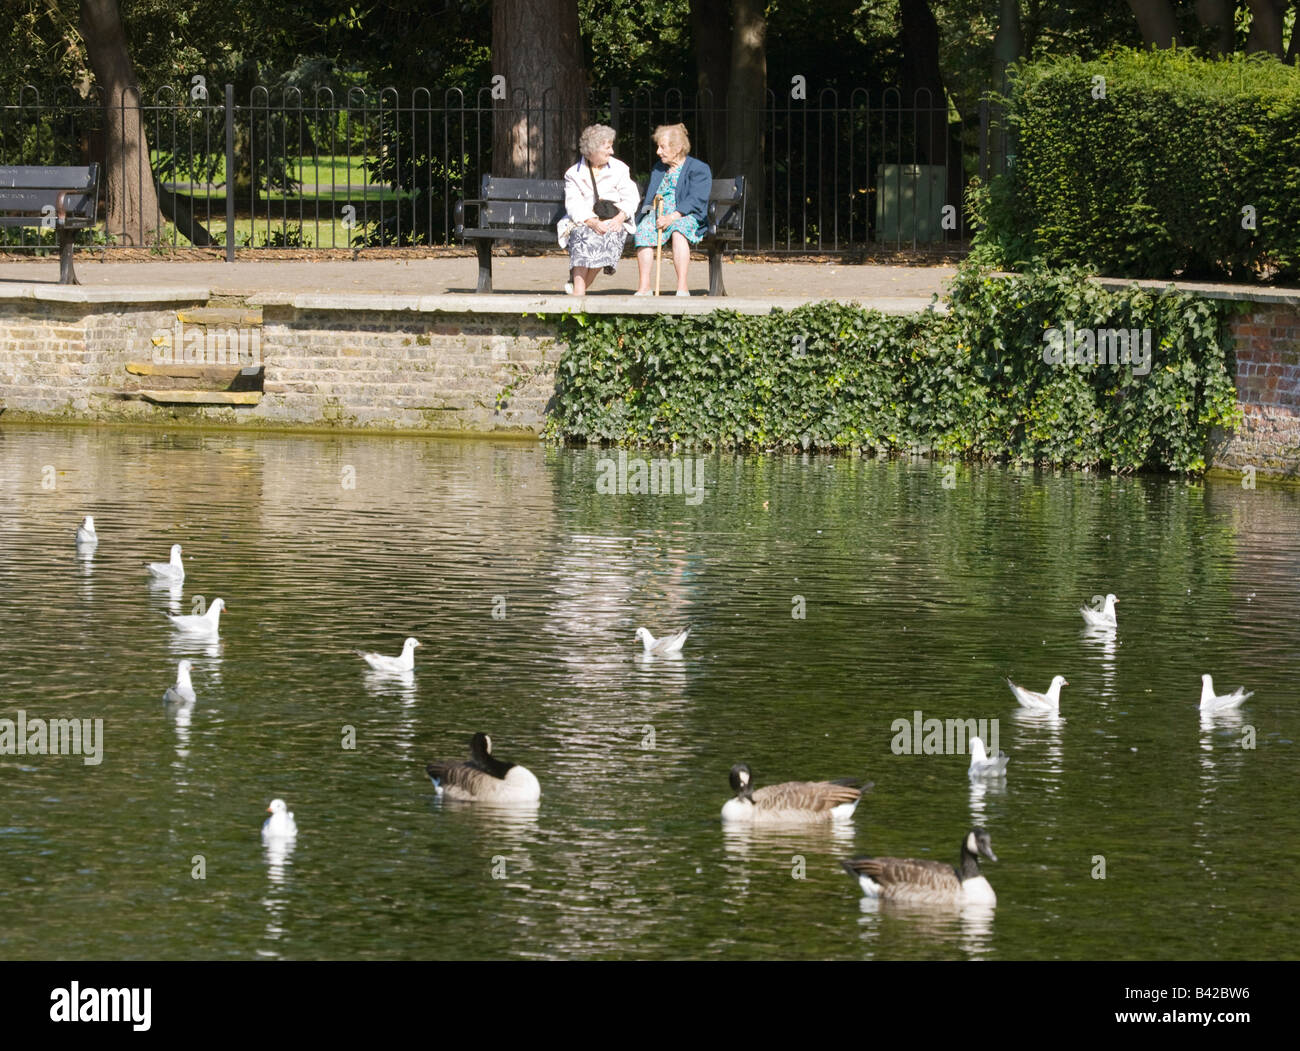 Two elderly ladies talk on a park bench in London, with geese and gulls on a pond, Sutton Ponds, Sutton, Surrey, England Stock Photo